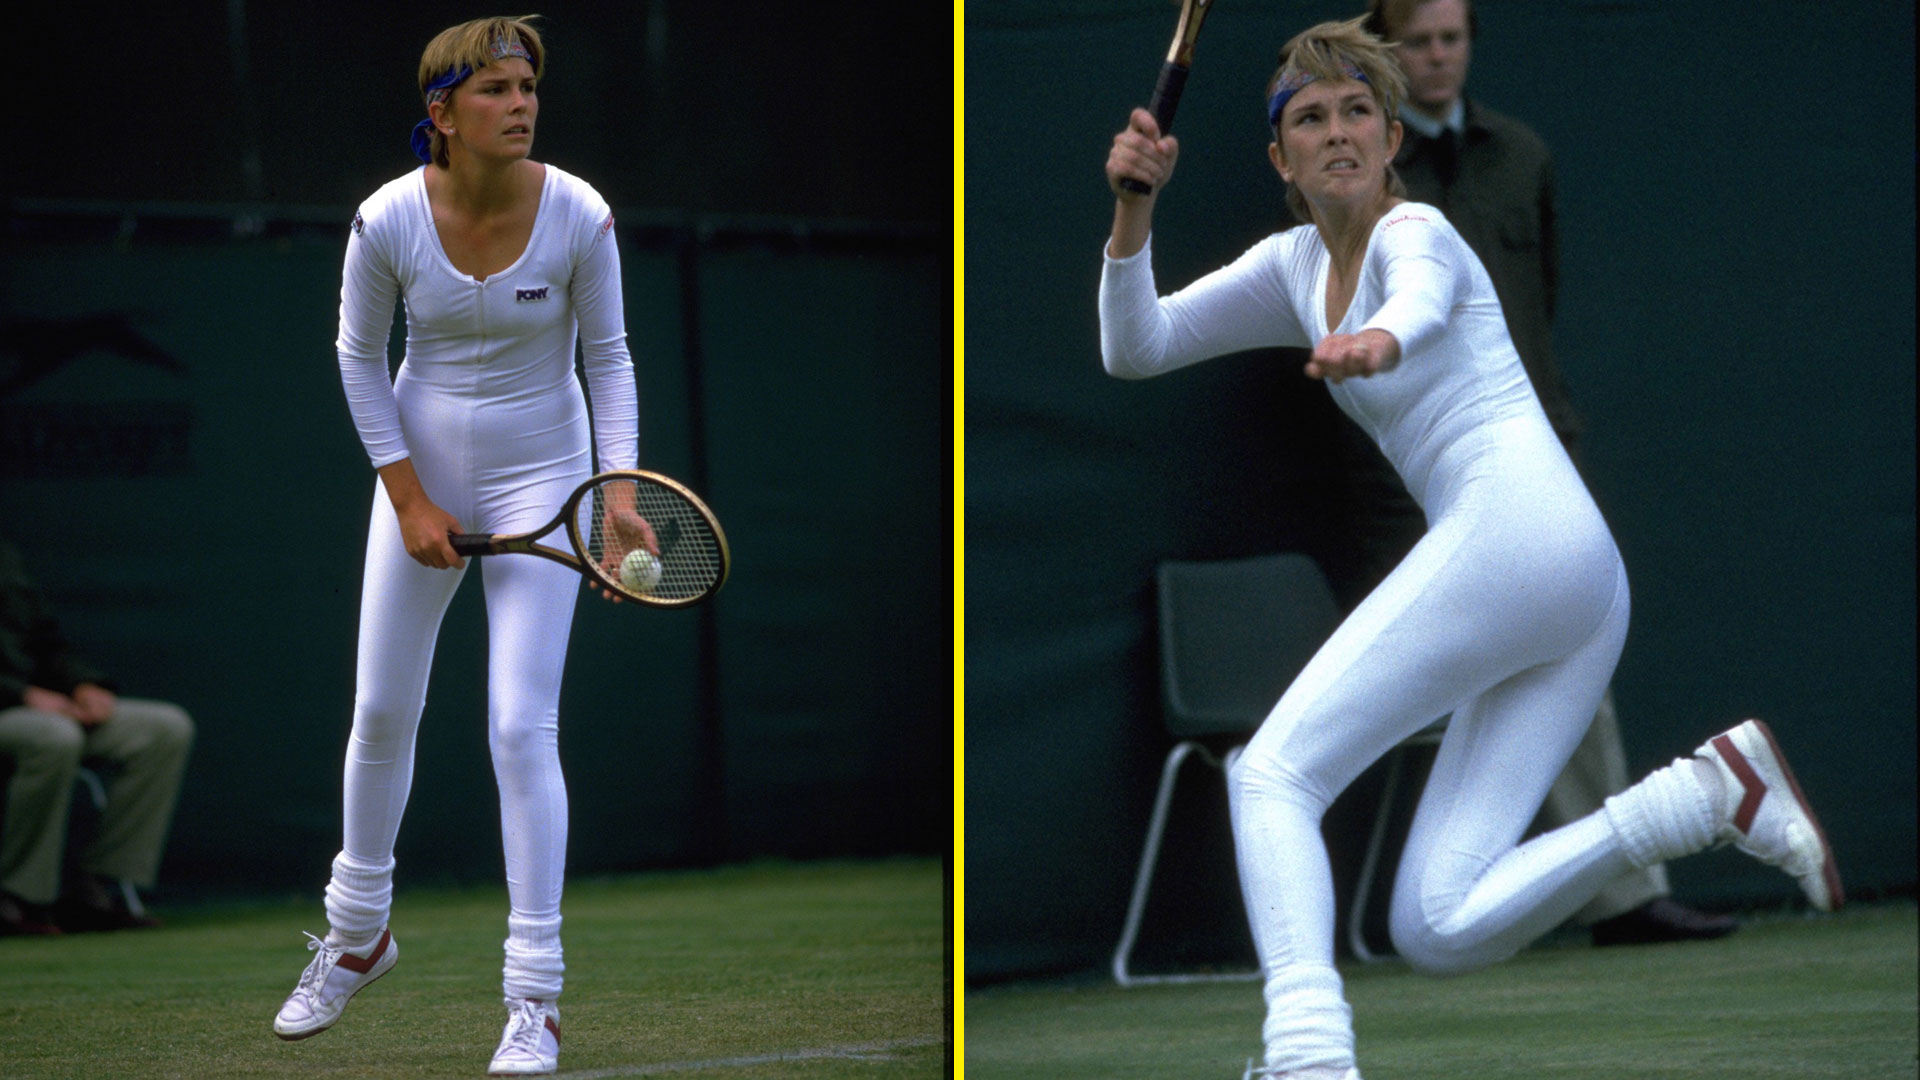 My controversial Wimbledon outfit landed me in trouble - the ref made it clear